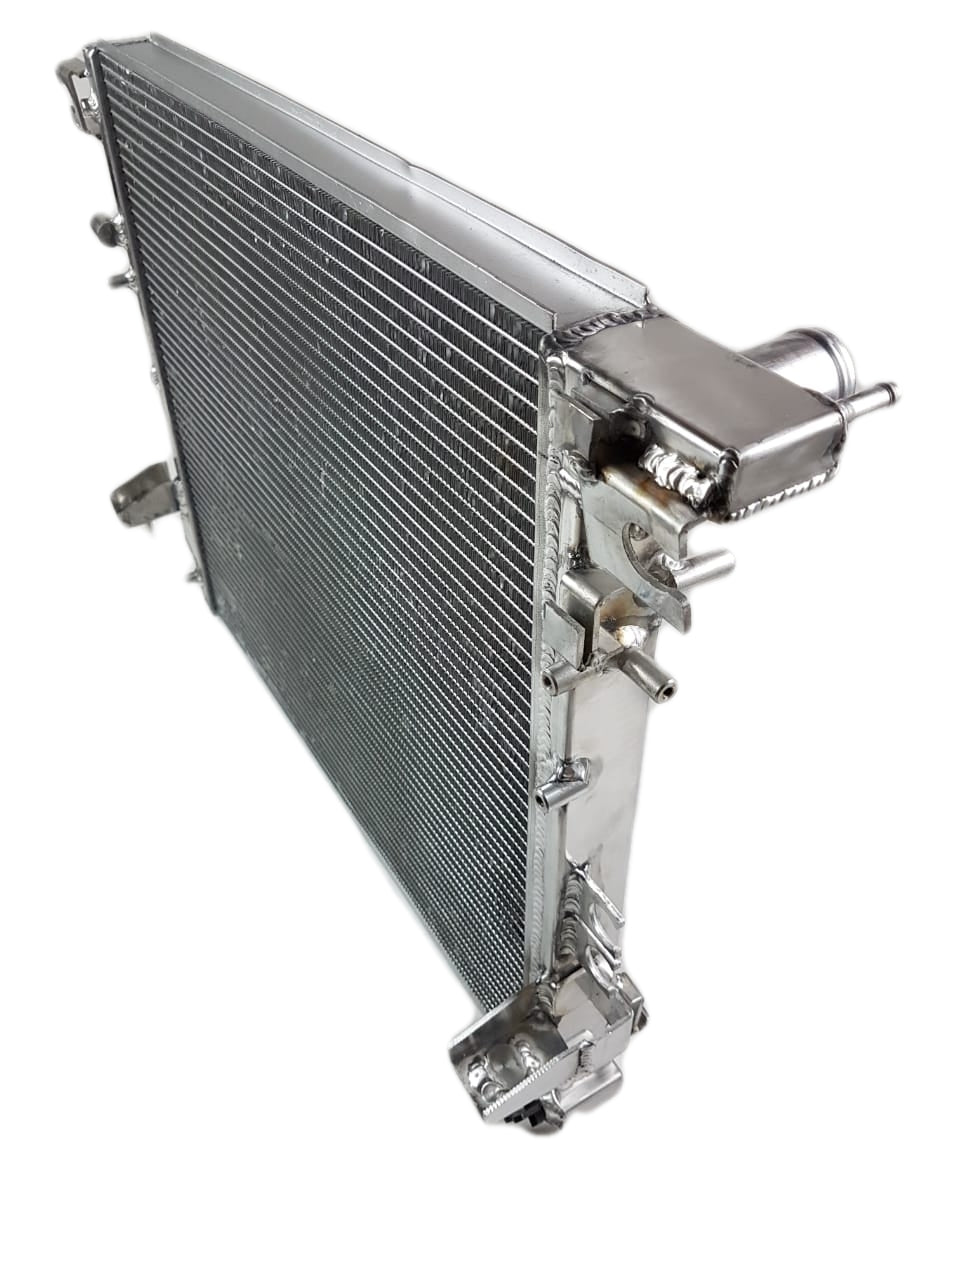 Radiator 2 Cores for Jeep Wrangler JL (Without Warranty)